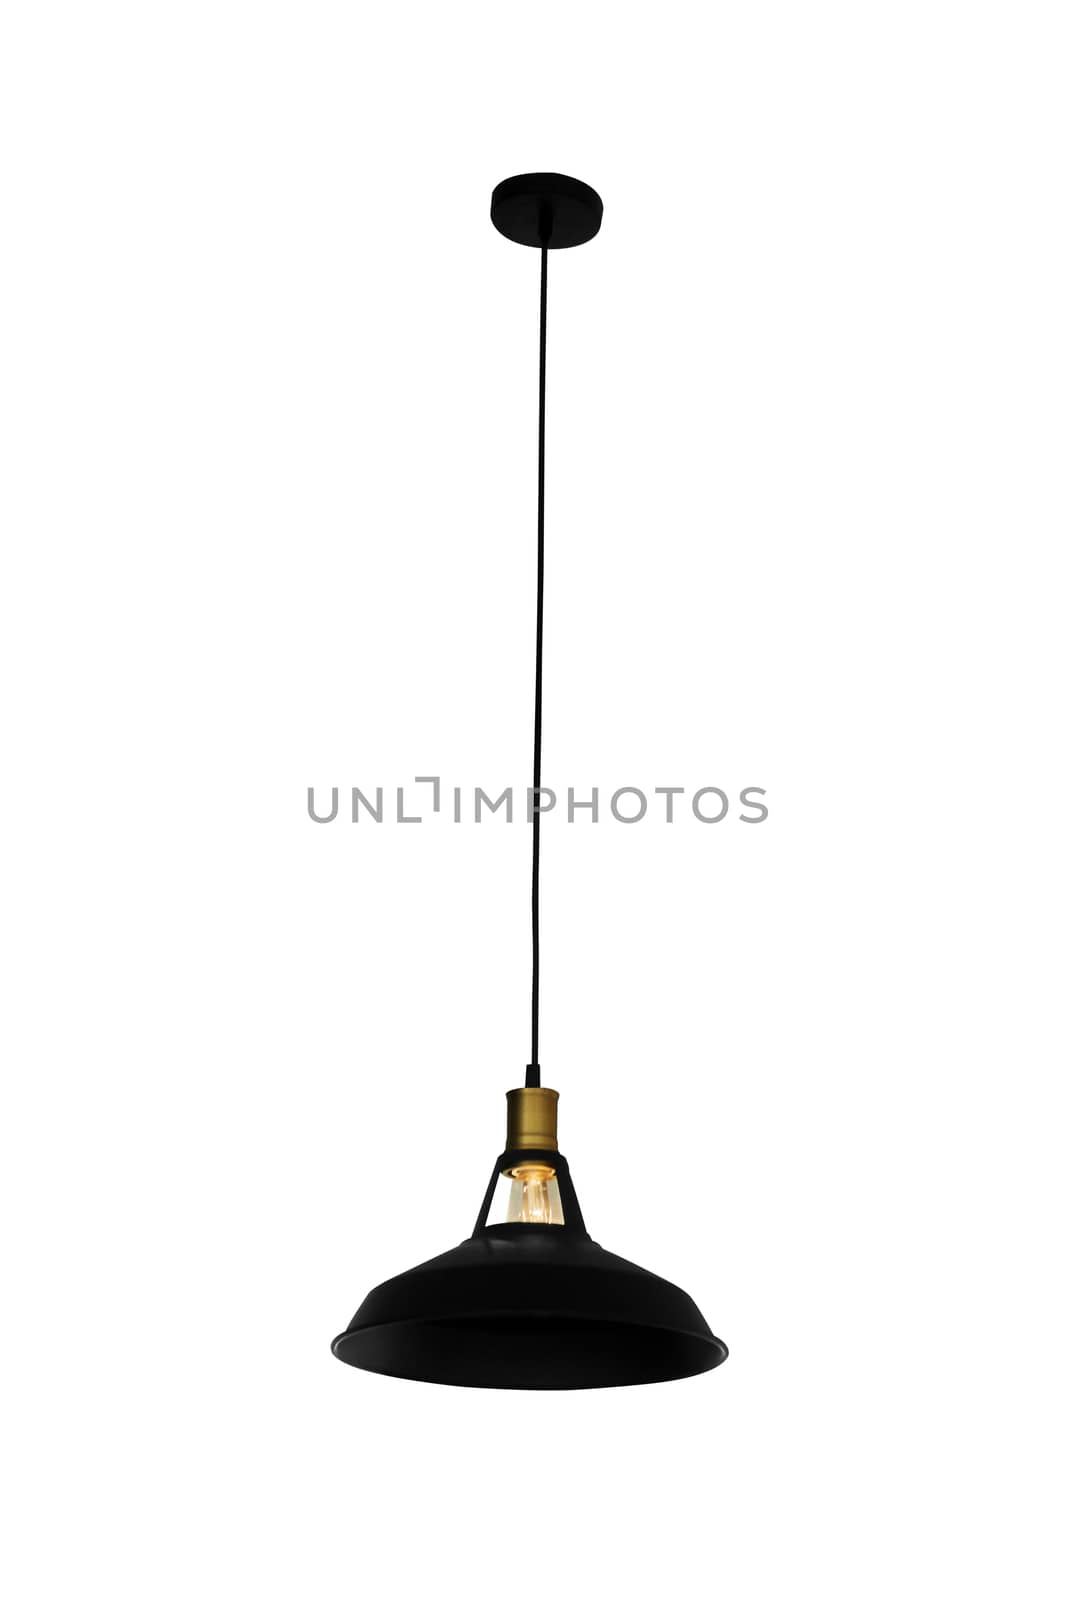 Black hanging lamp isolated on white background, with clipping path.